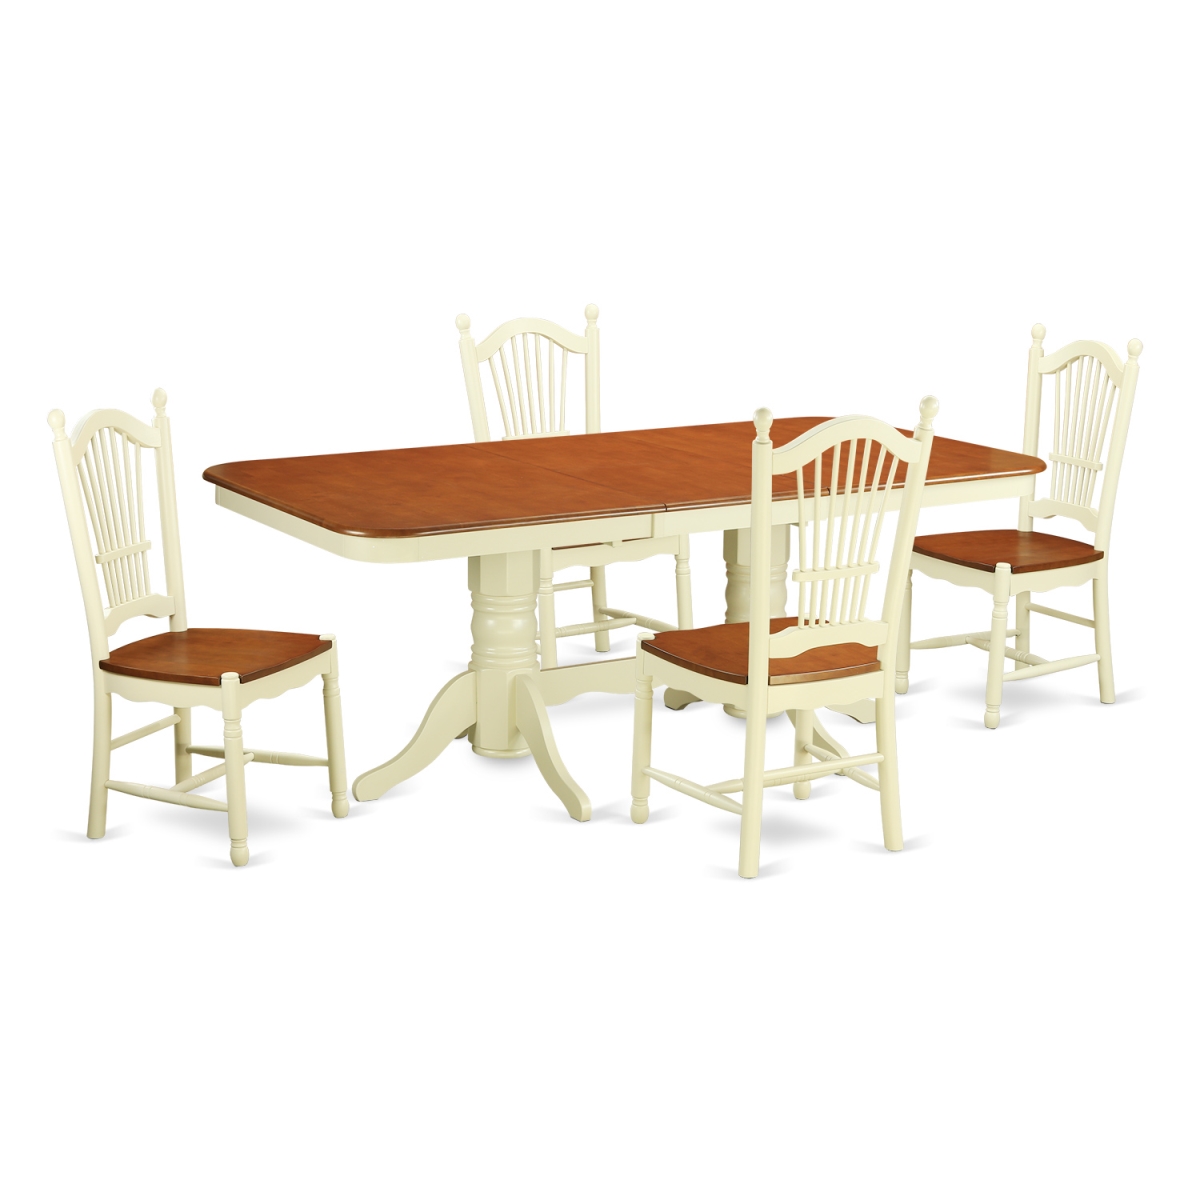 NADO5-WHI-W Kitchen Nook Dining Set - Table & 4 Chairs, Buttermilk & Cherry - 5 Piece -  East West Furniture